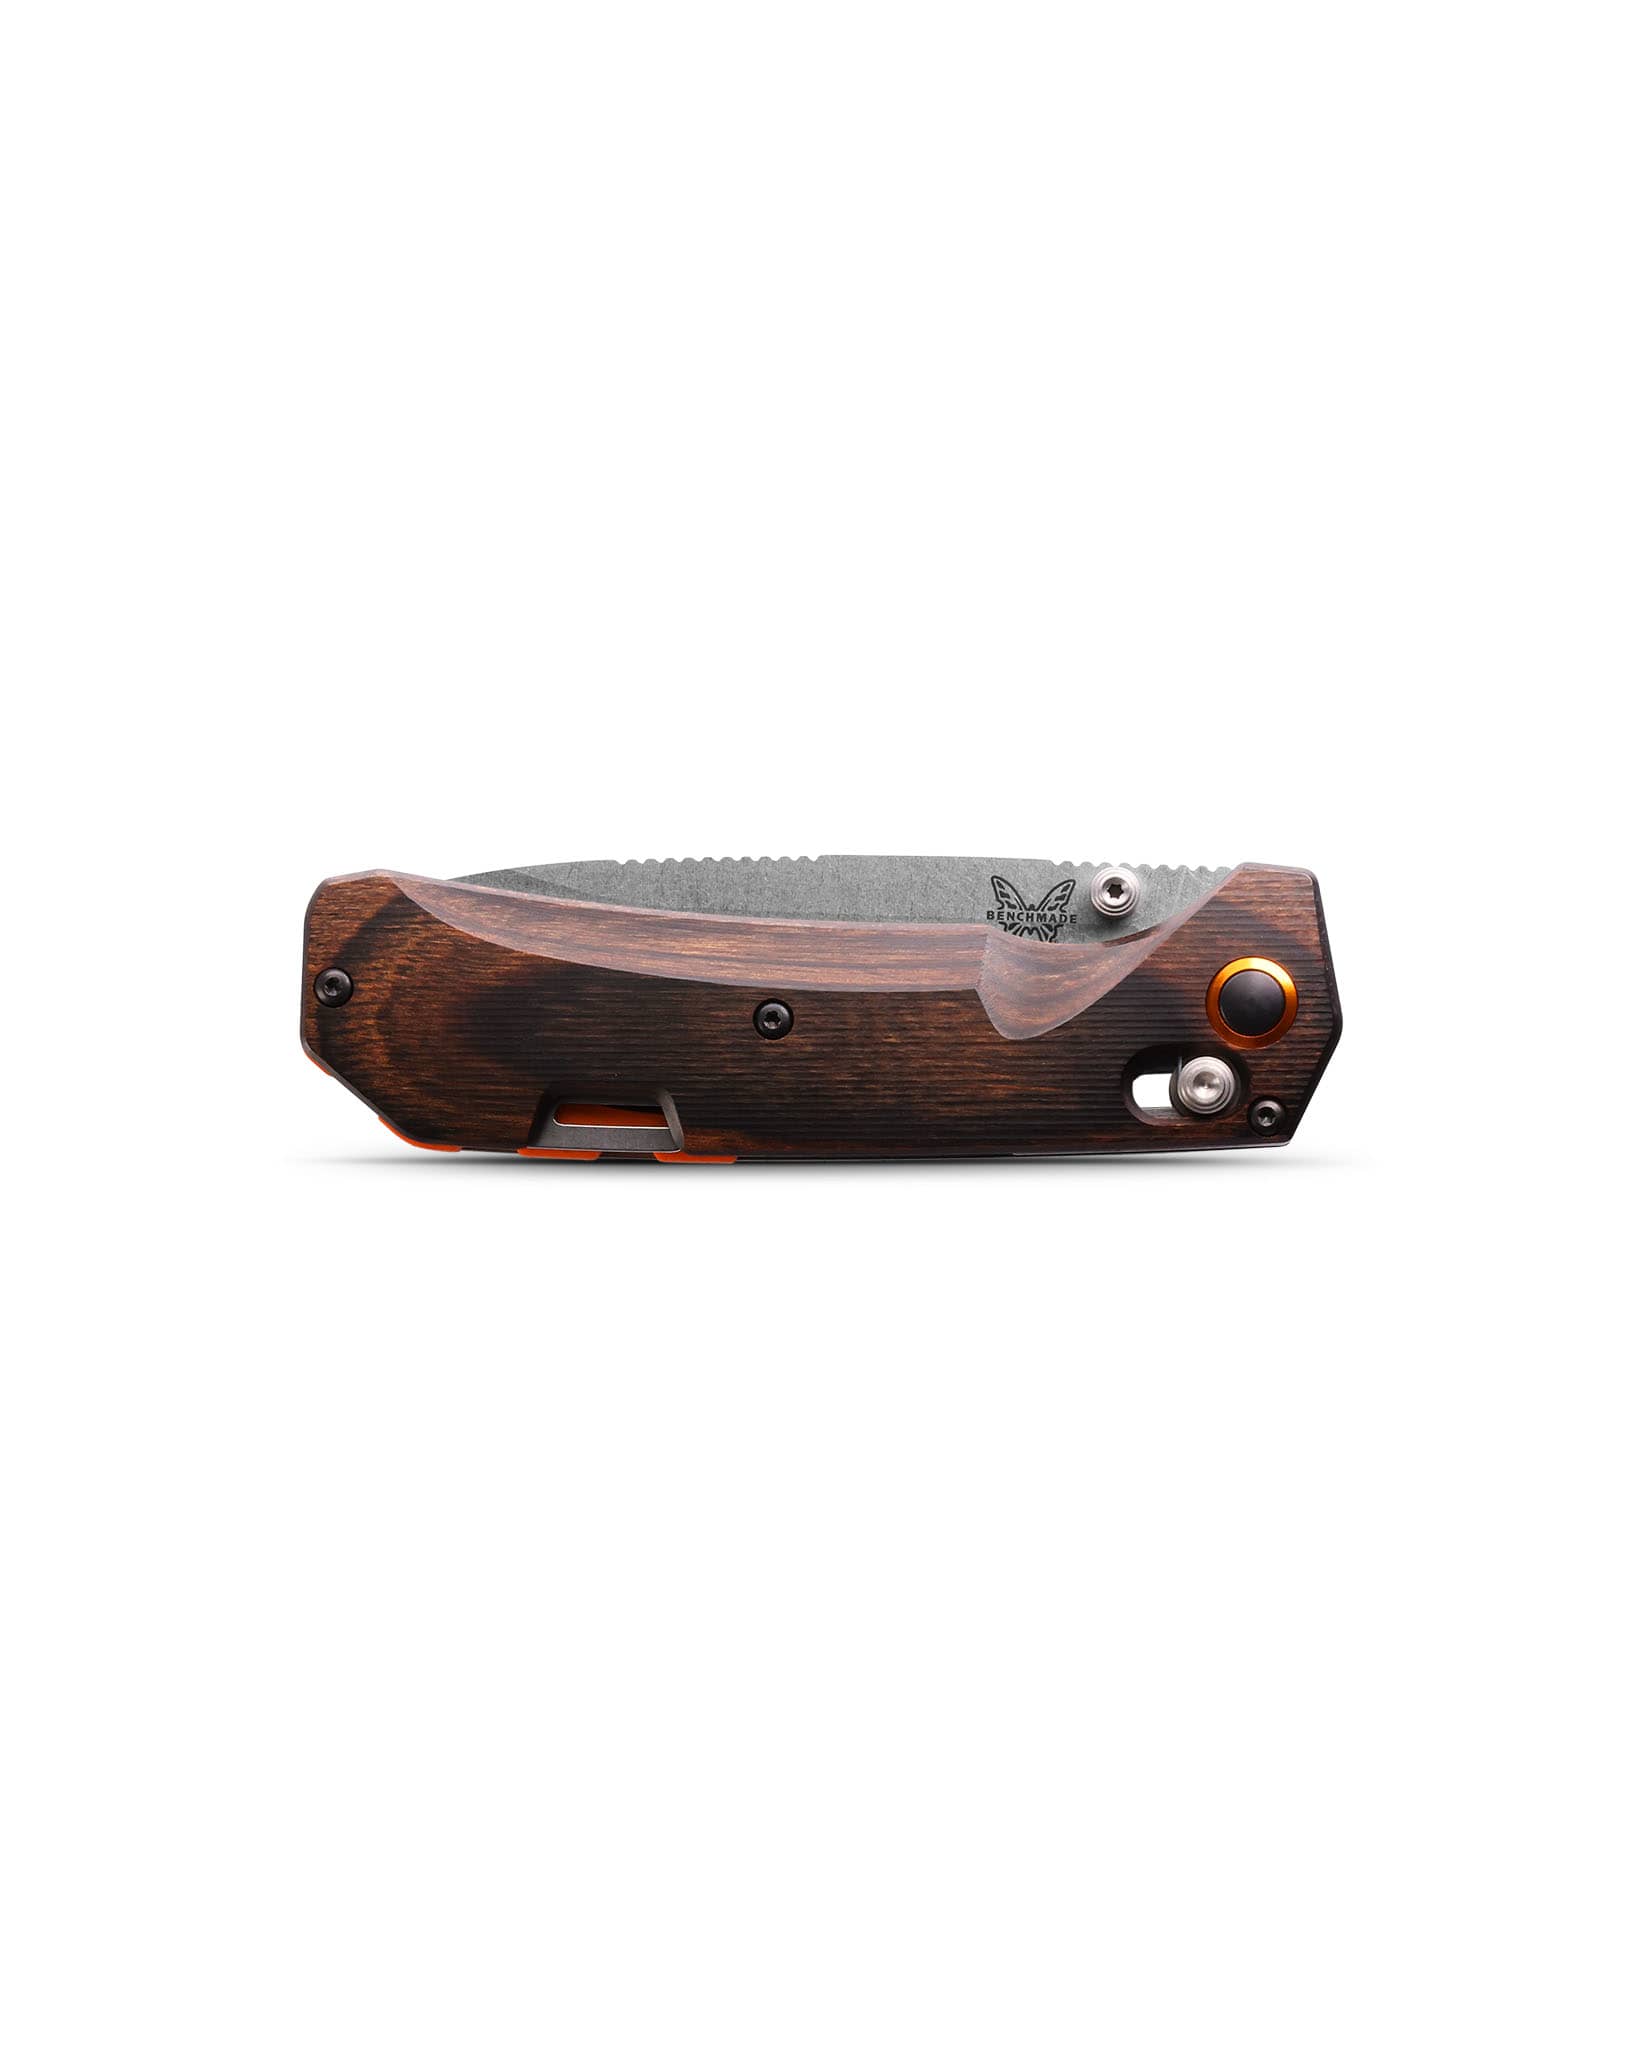 Benchmade® 15062-01 Grizzly Creek Folding Knife